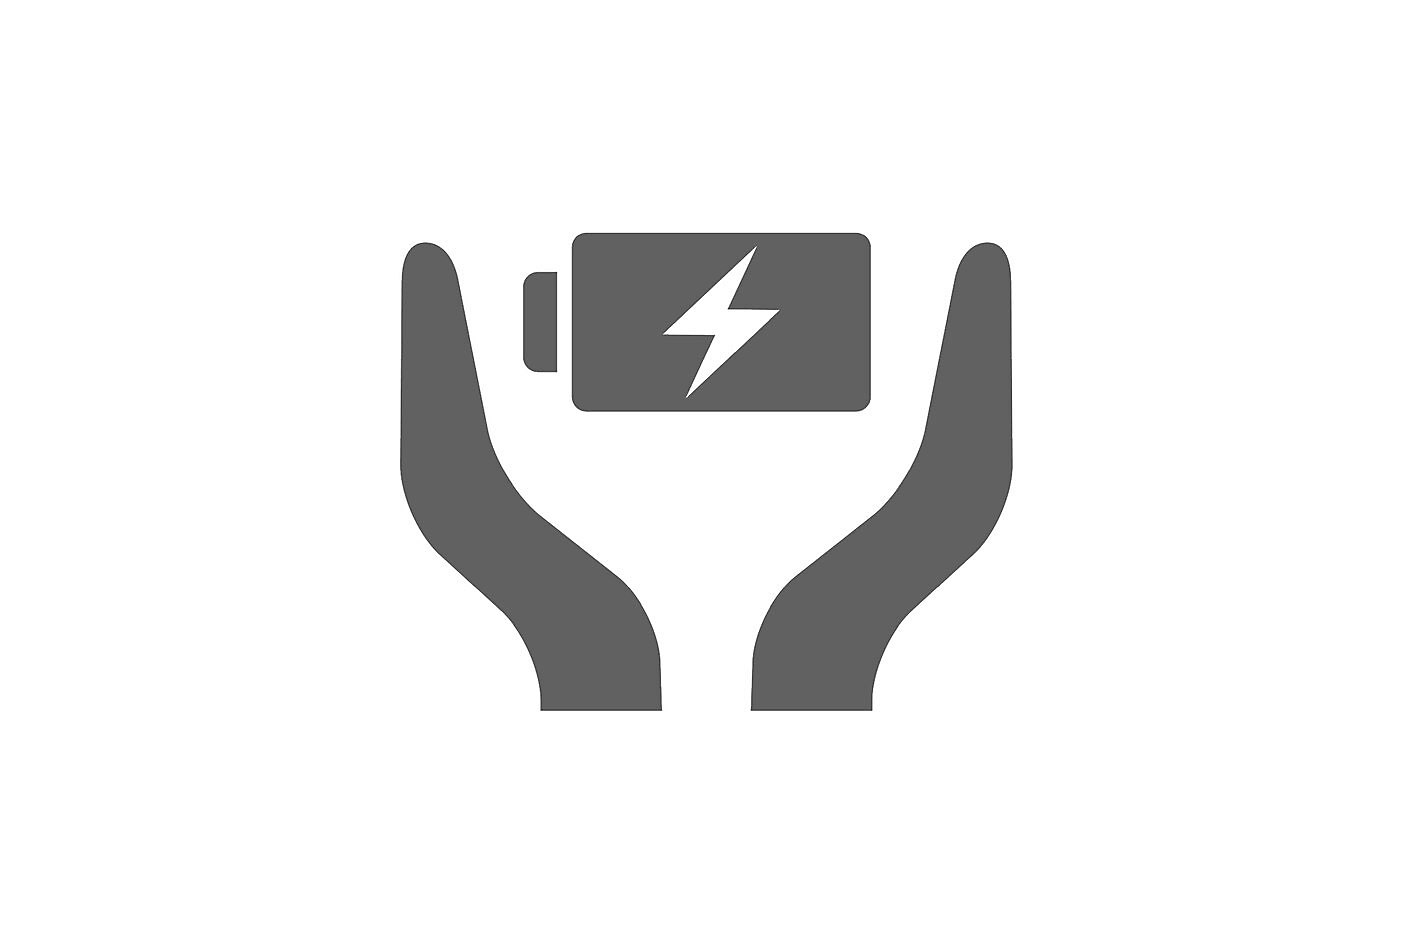 Icon image of two hands surrounding a battery with a lightning bolt symbol on it